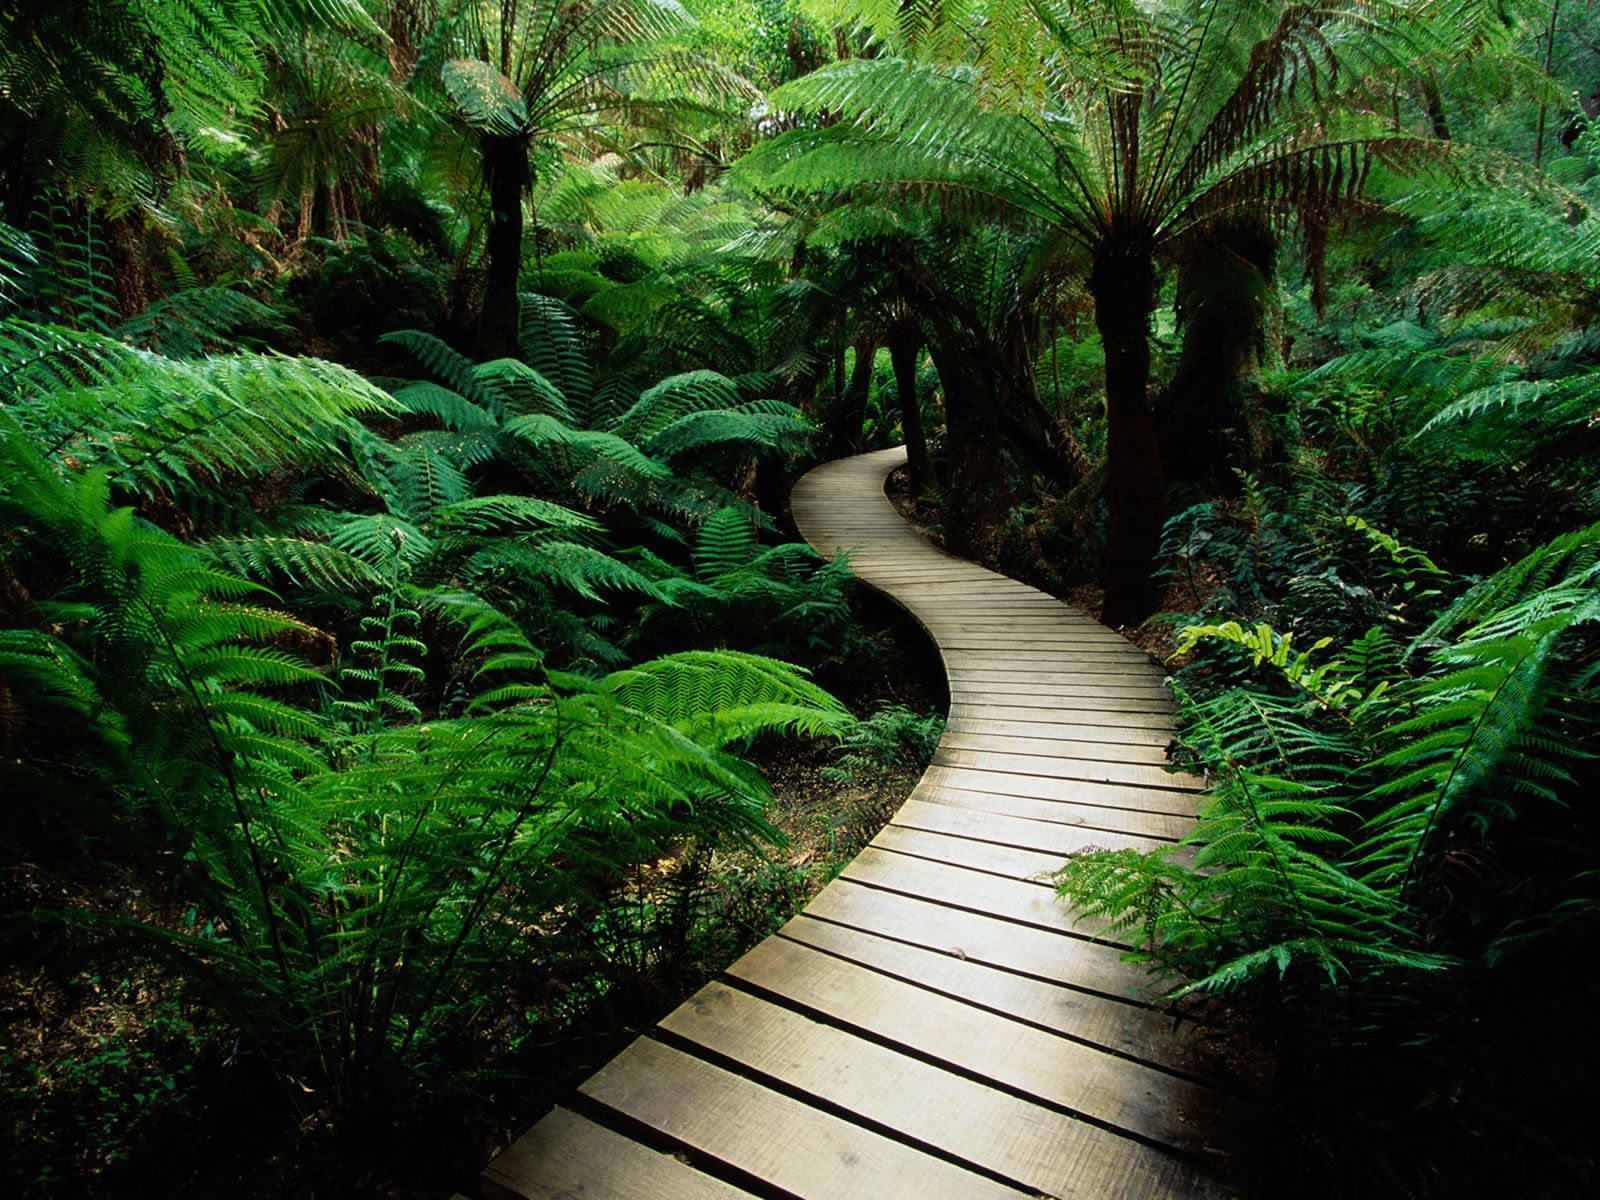 Curved Pathway in Wild Nature # 1600x1200. All For Desktop